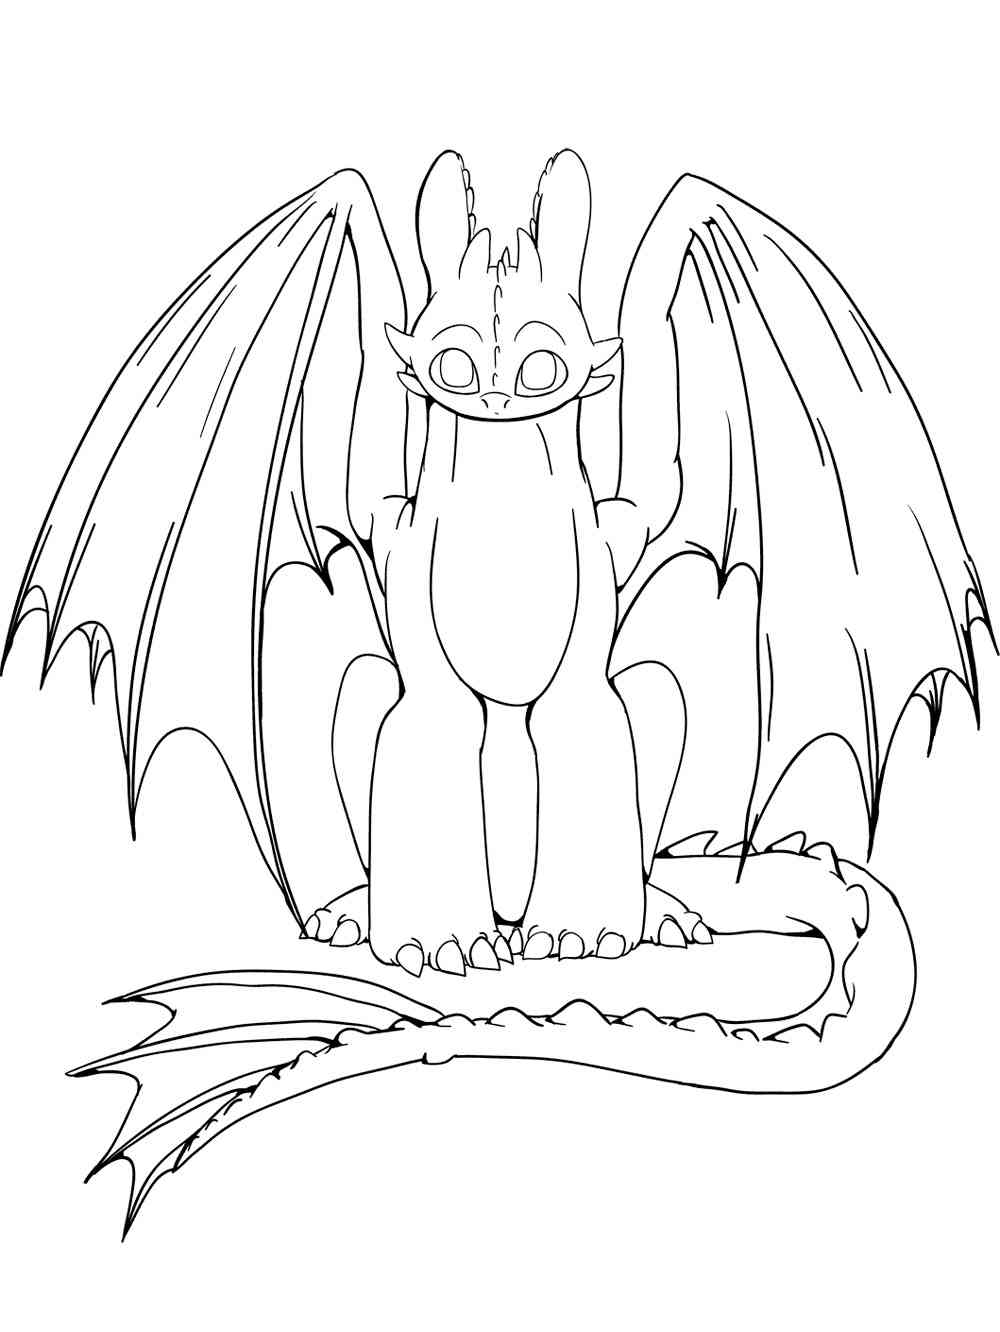 Night Fury from How To Train Your Dragon coloring page